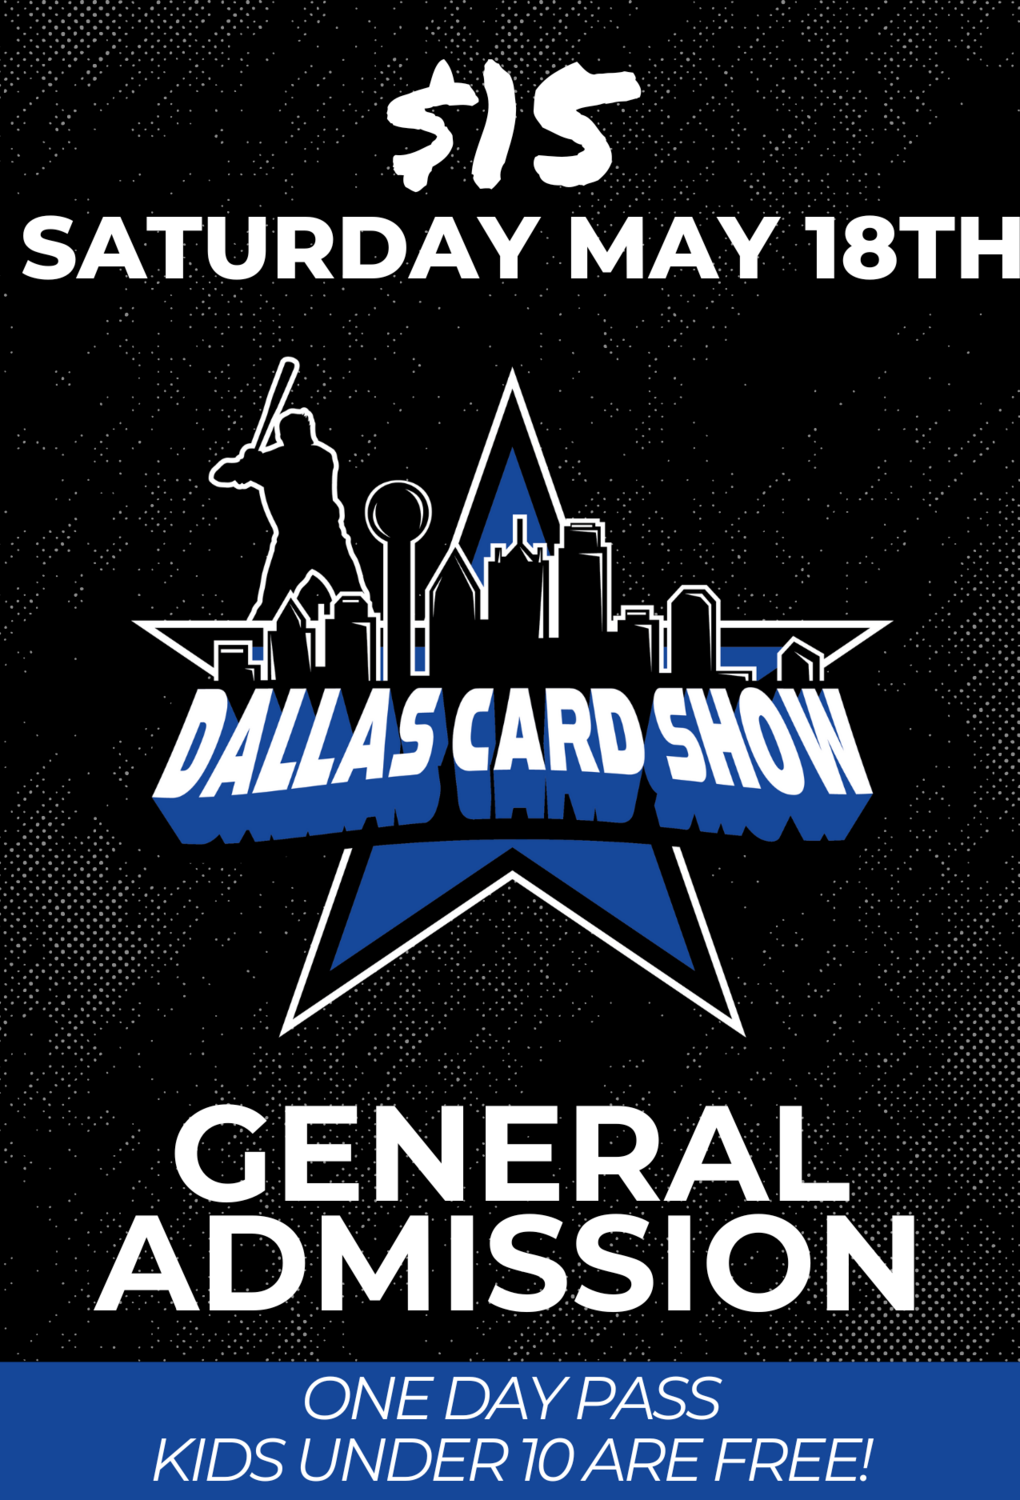 Saturday May 18th - General Admission